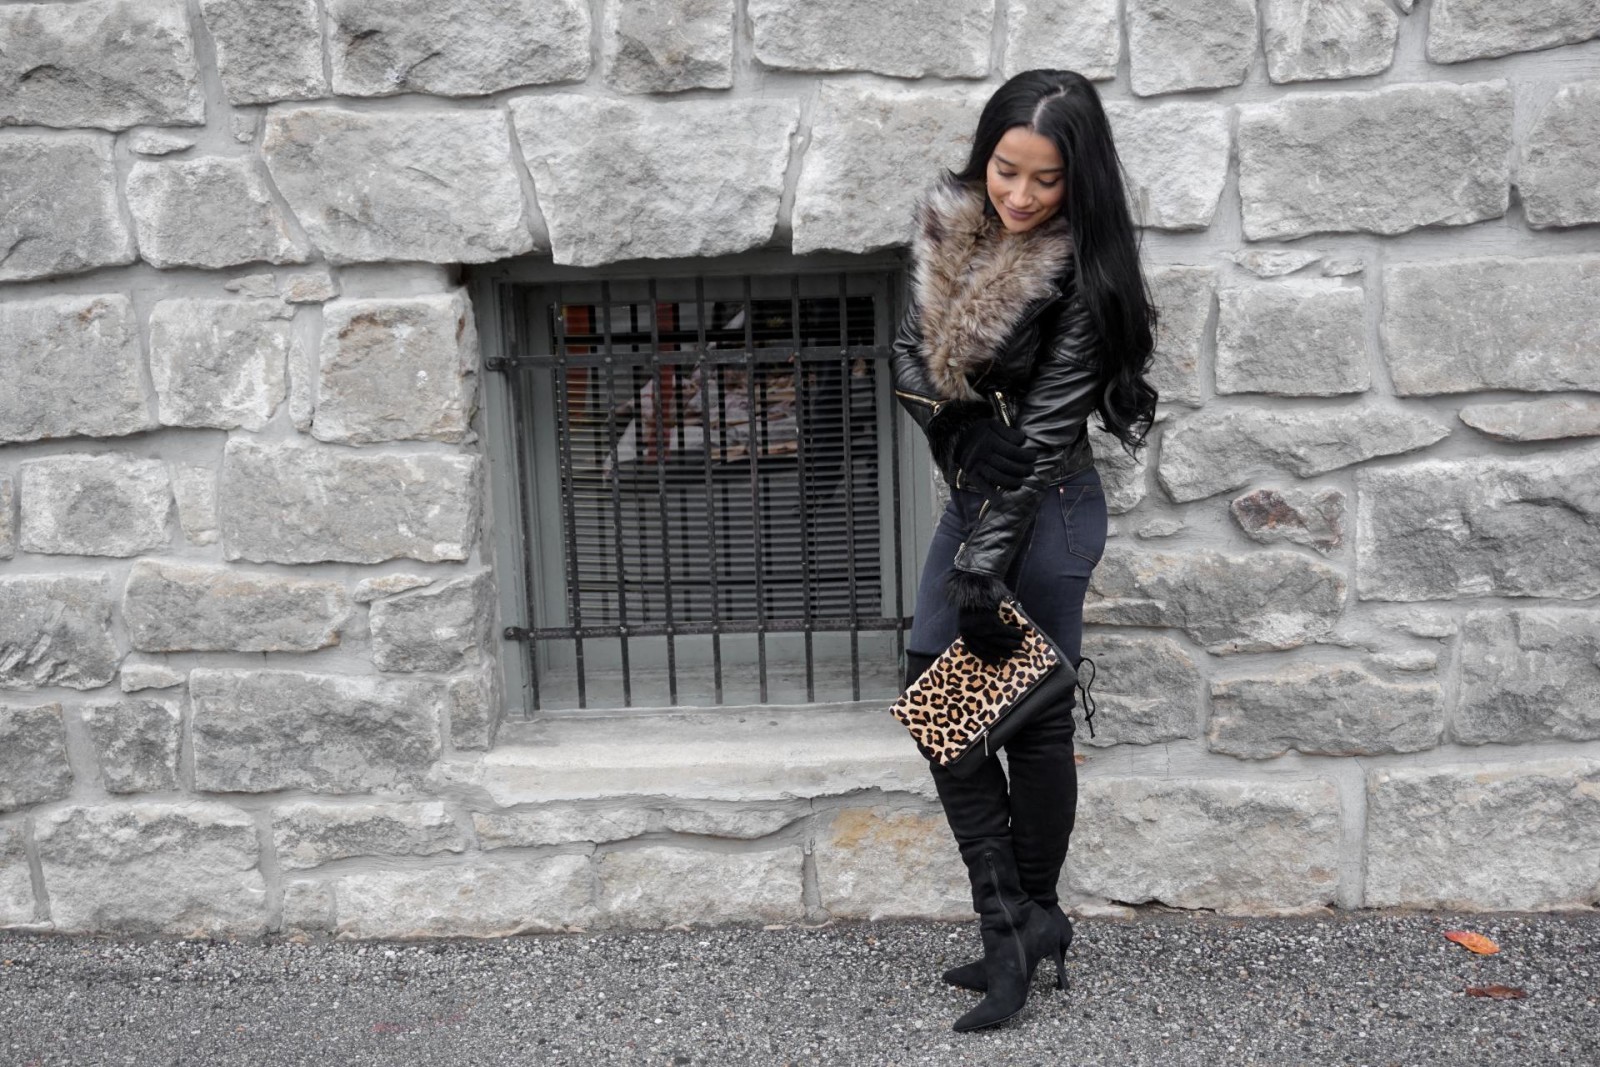 Motto Leather Jacket, Faux Fur, Aldo Thigh High Boots